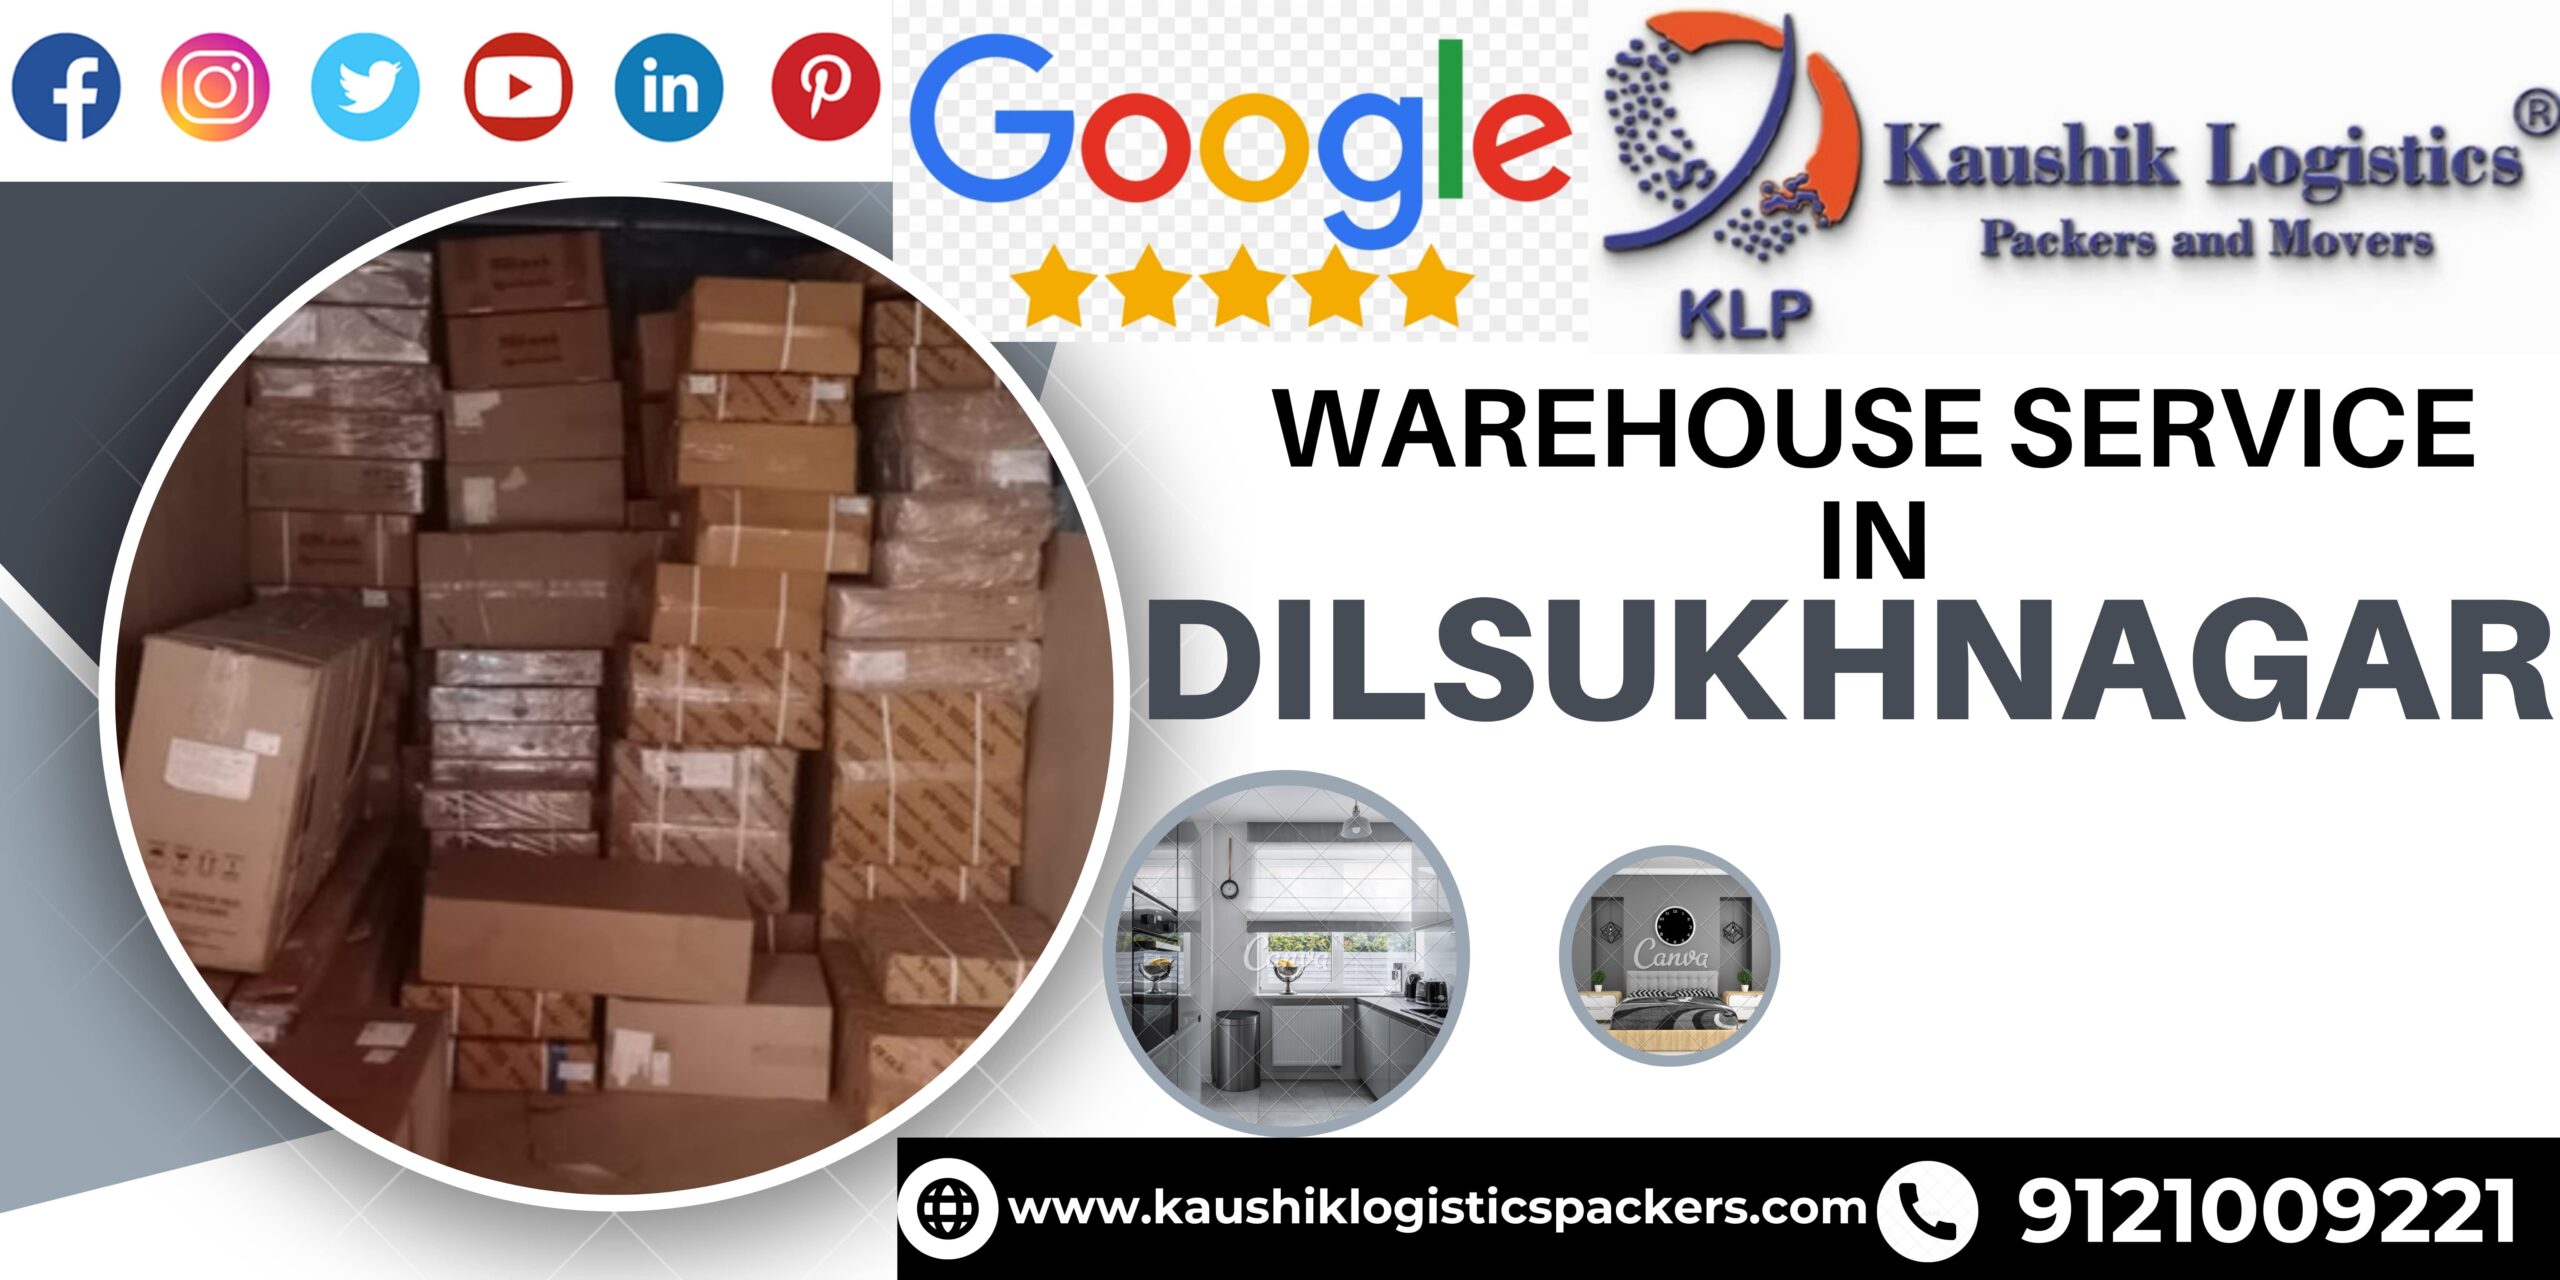 Packers and Movers In Dilsukhnagar